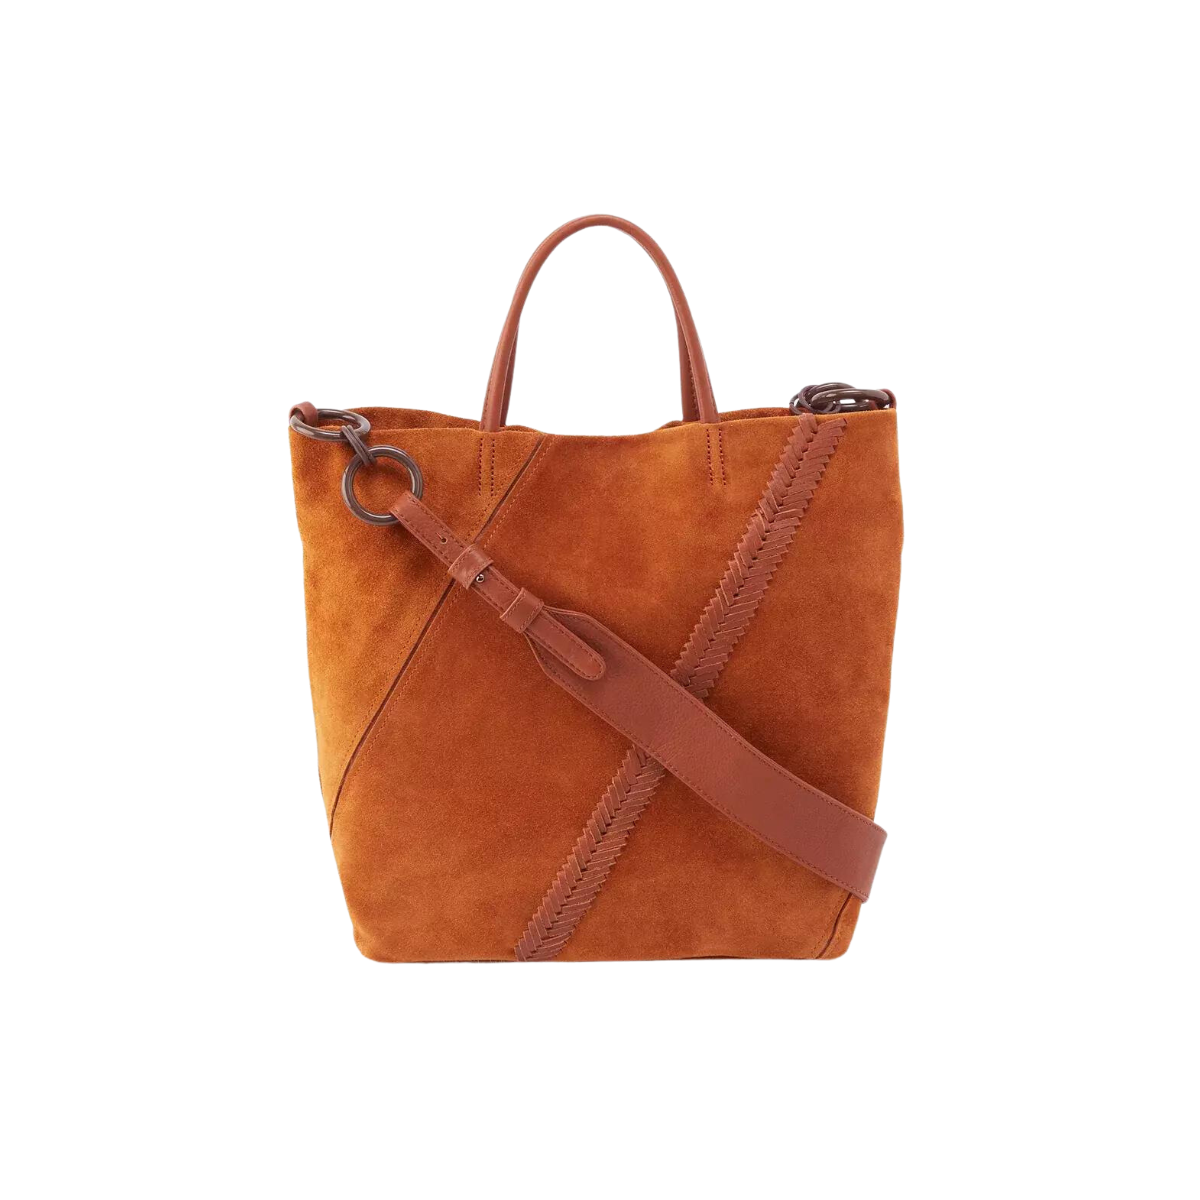 Hobo Tripp Tote in Cognac Suede with Whipstitch